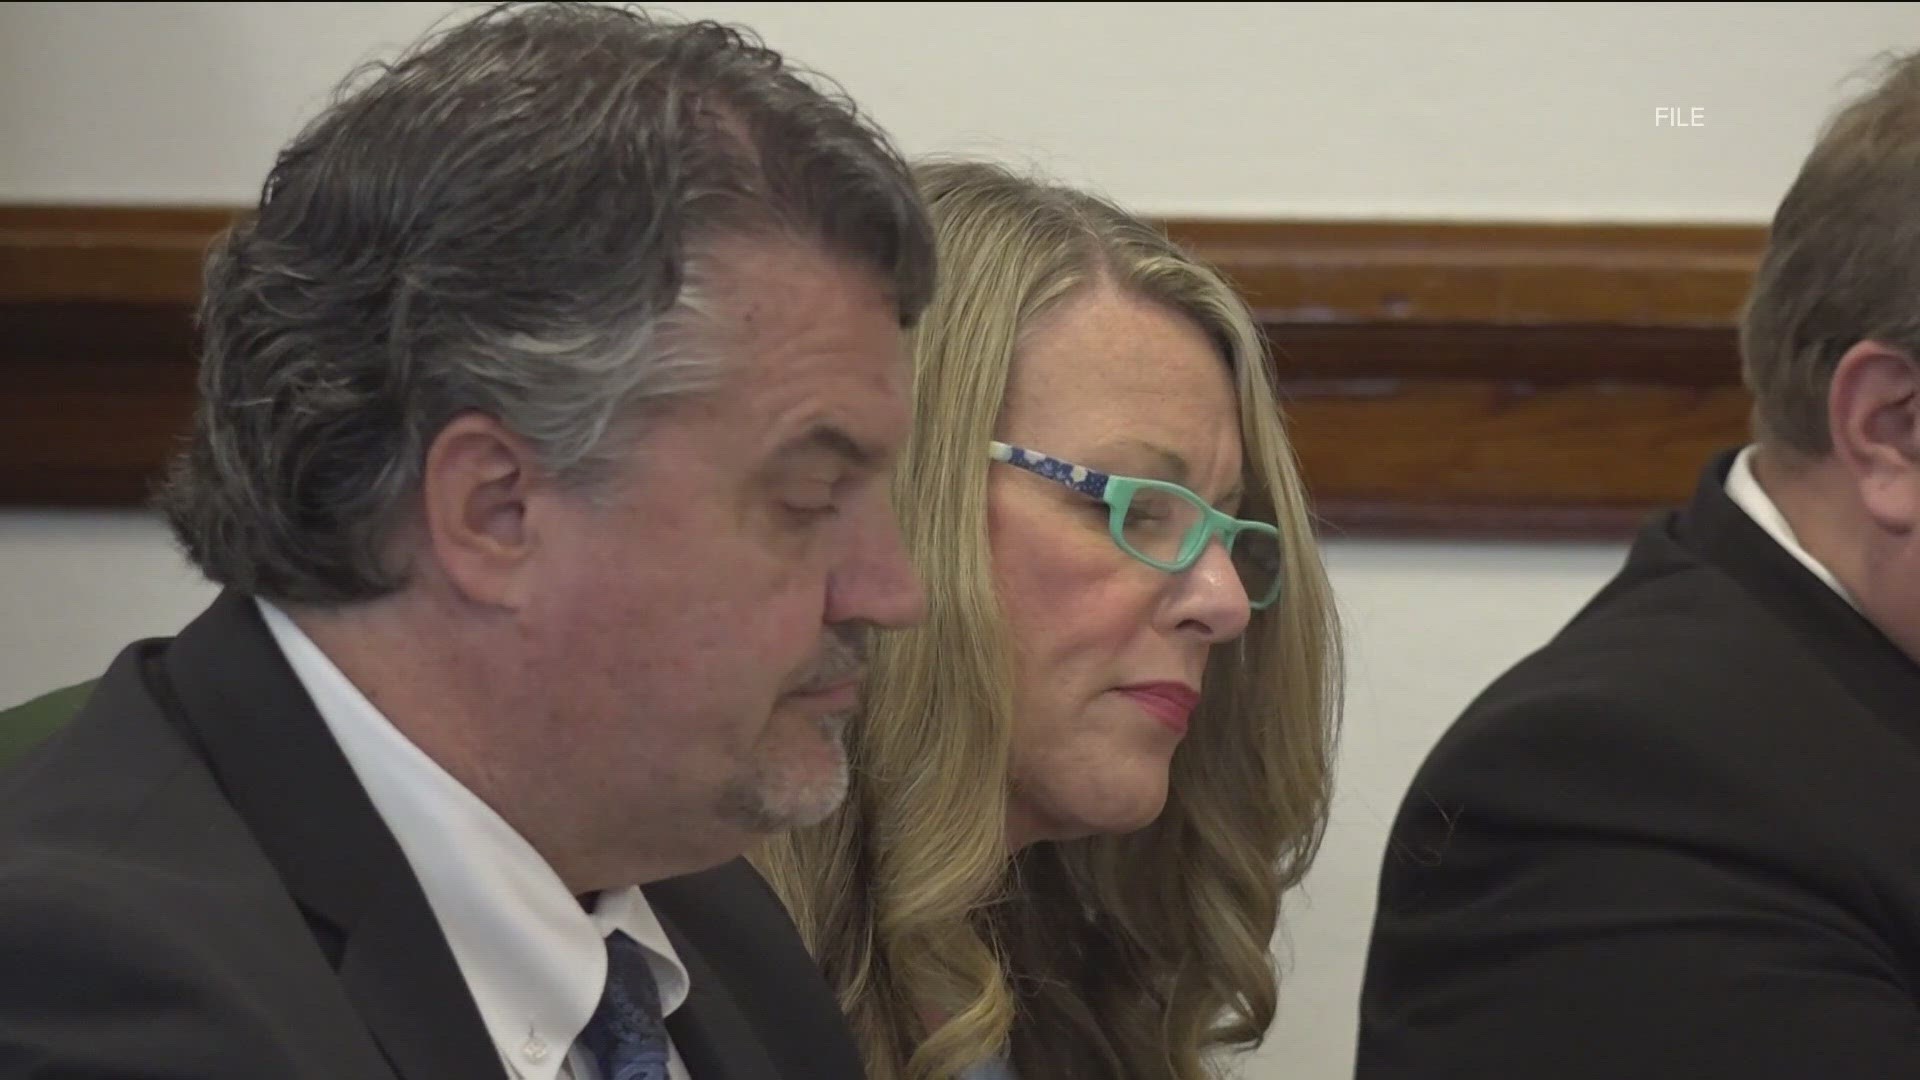 In August, Vallow's attorneys filed 16 appeals, ranging from the grand jury to her sentencing.